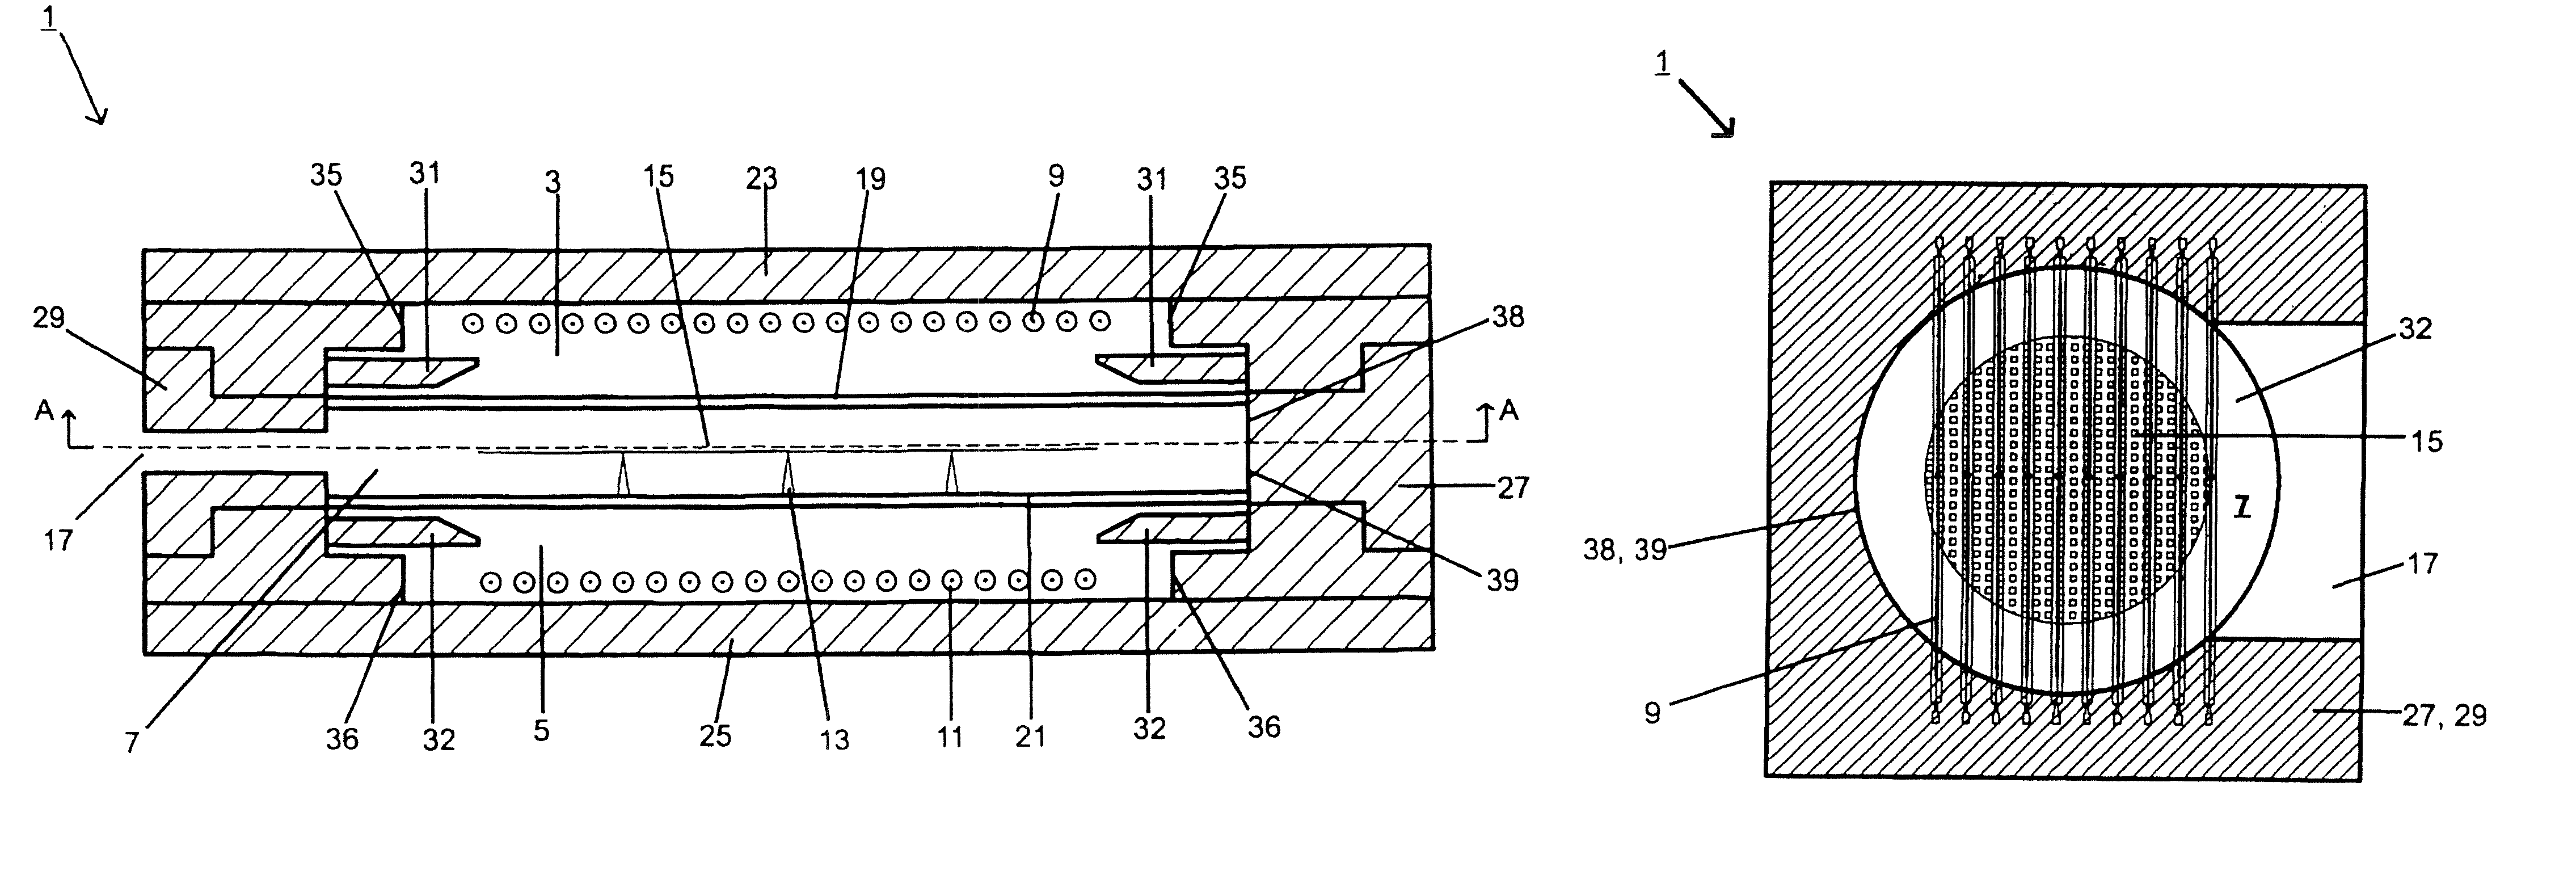 Apparatus for thermally treating semiconductor substrates